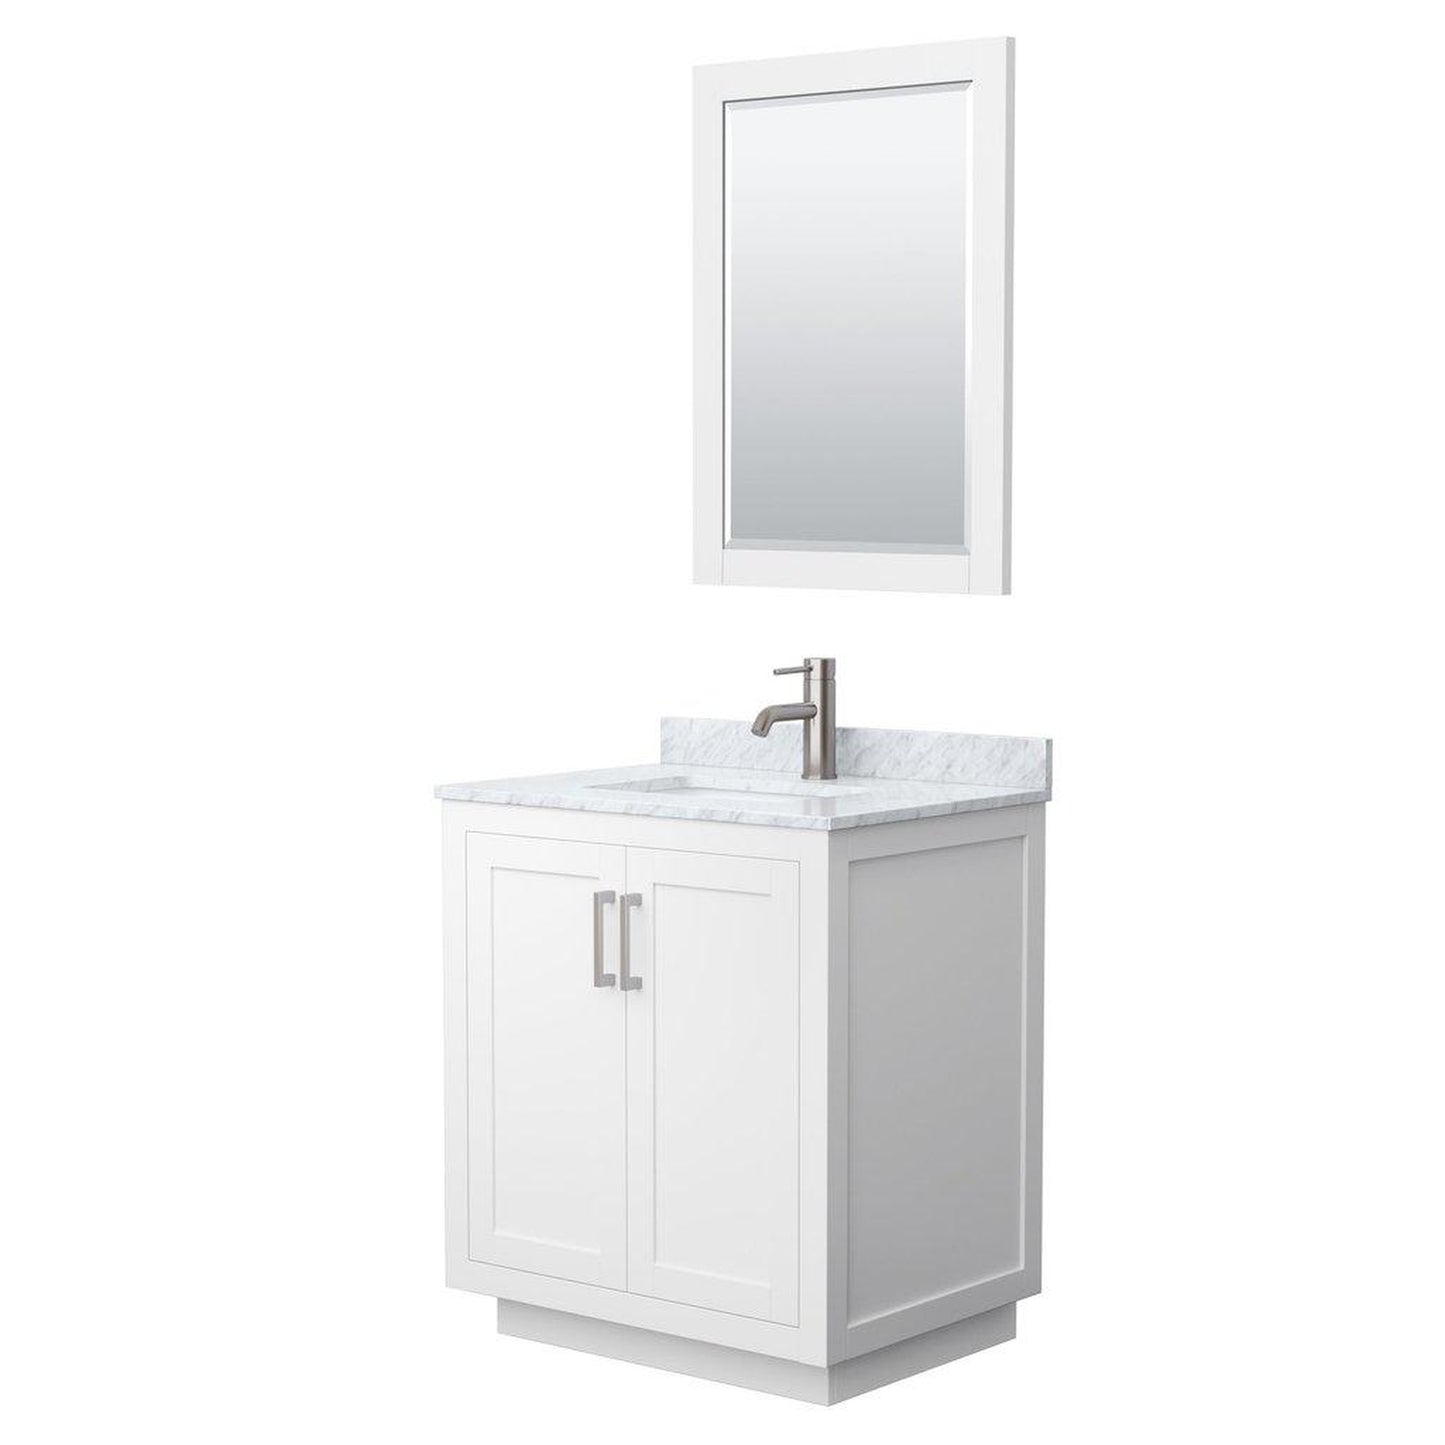 Wyndham Collection Miranda 30" Single Bathroom White Vanity Set With White Carrara Marble Countertop, Undermount Square Sink, 24" Mirror And Brushed Nickel Trim